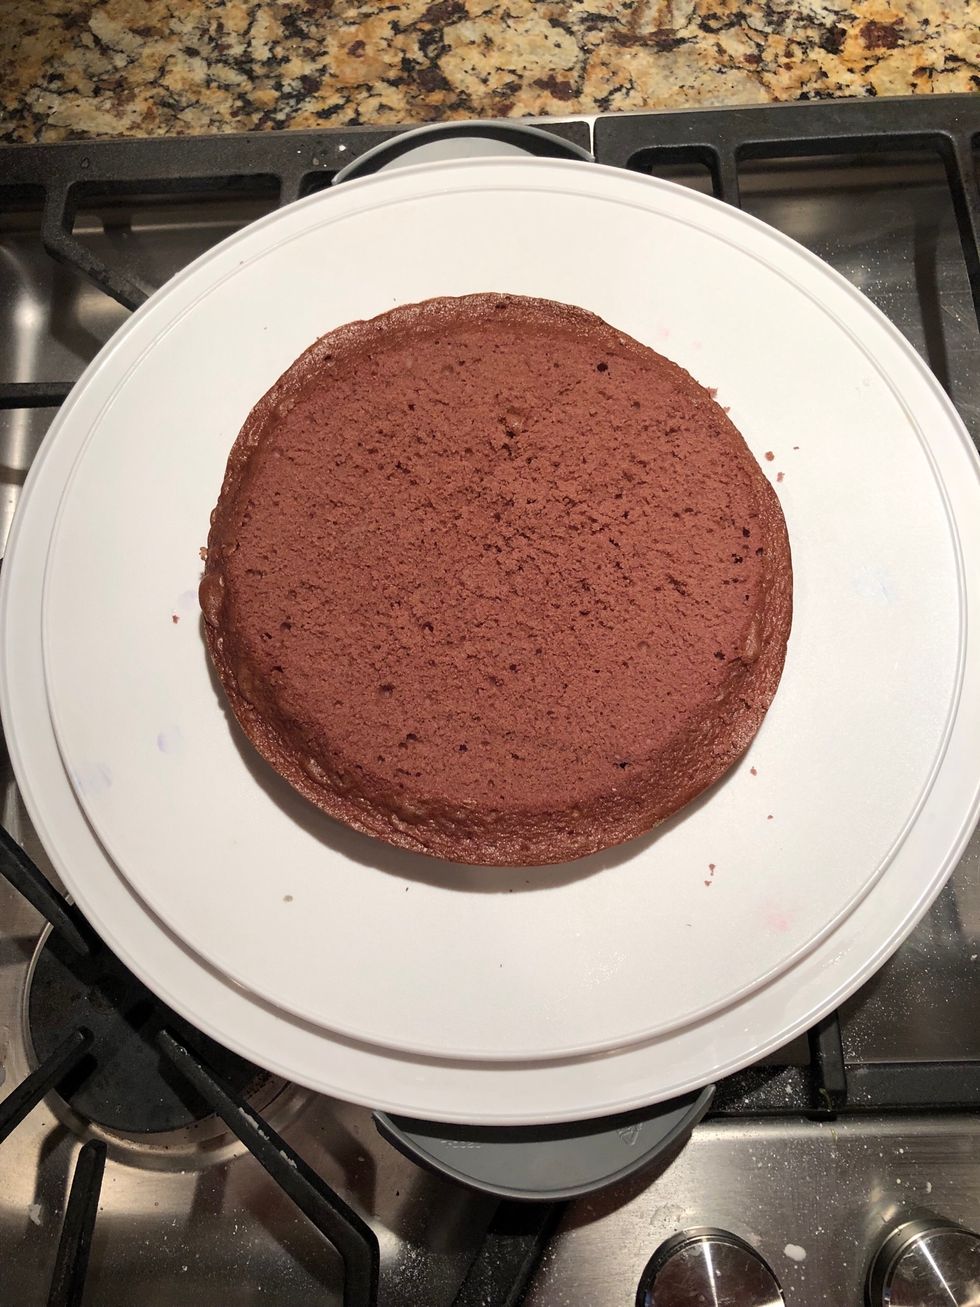 Place the purple layer of cake in the center of a plate.